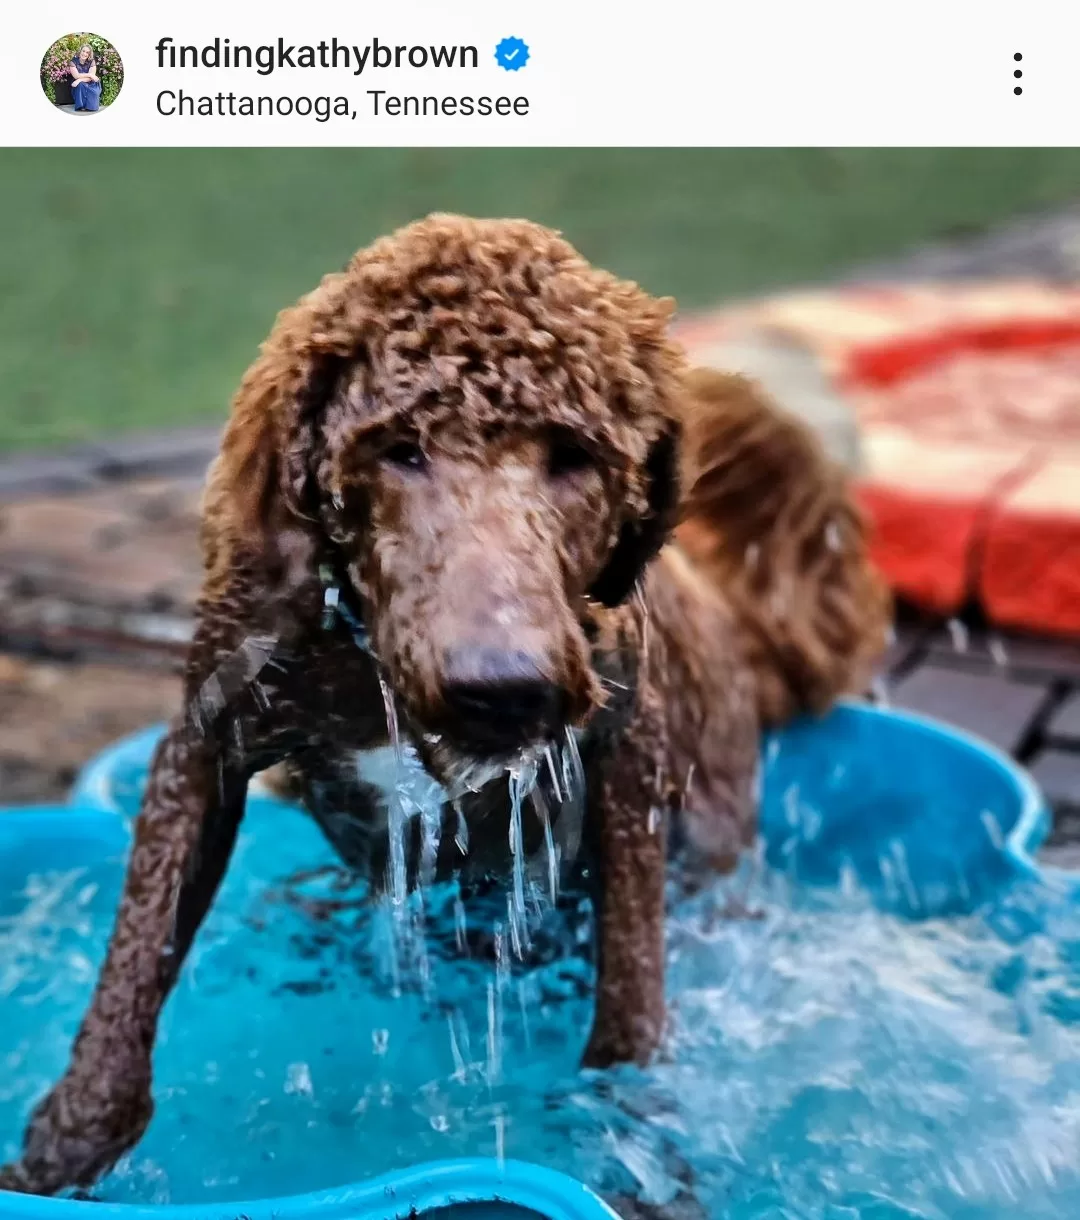 Instagram image of a golden doodle dog playing in a baby pool soaked with water at a dog park in Chattanooga, TN 